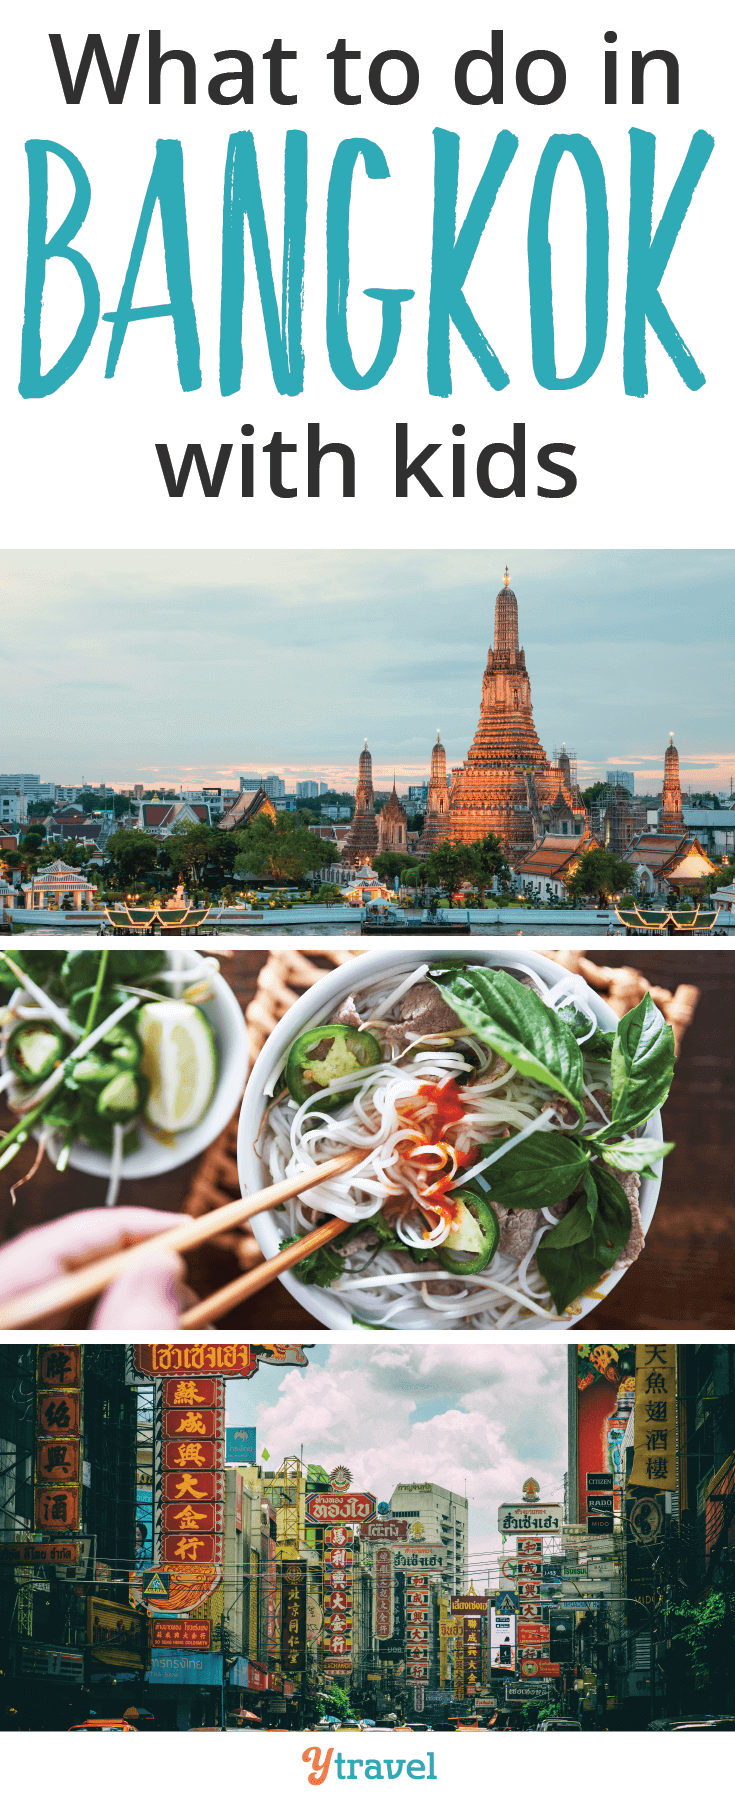 Looking to Bangkok for a family vacation? We've got you covered for what to do in Bangkok with kids!